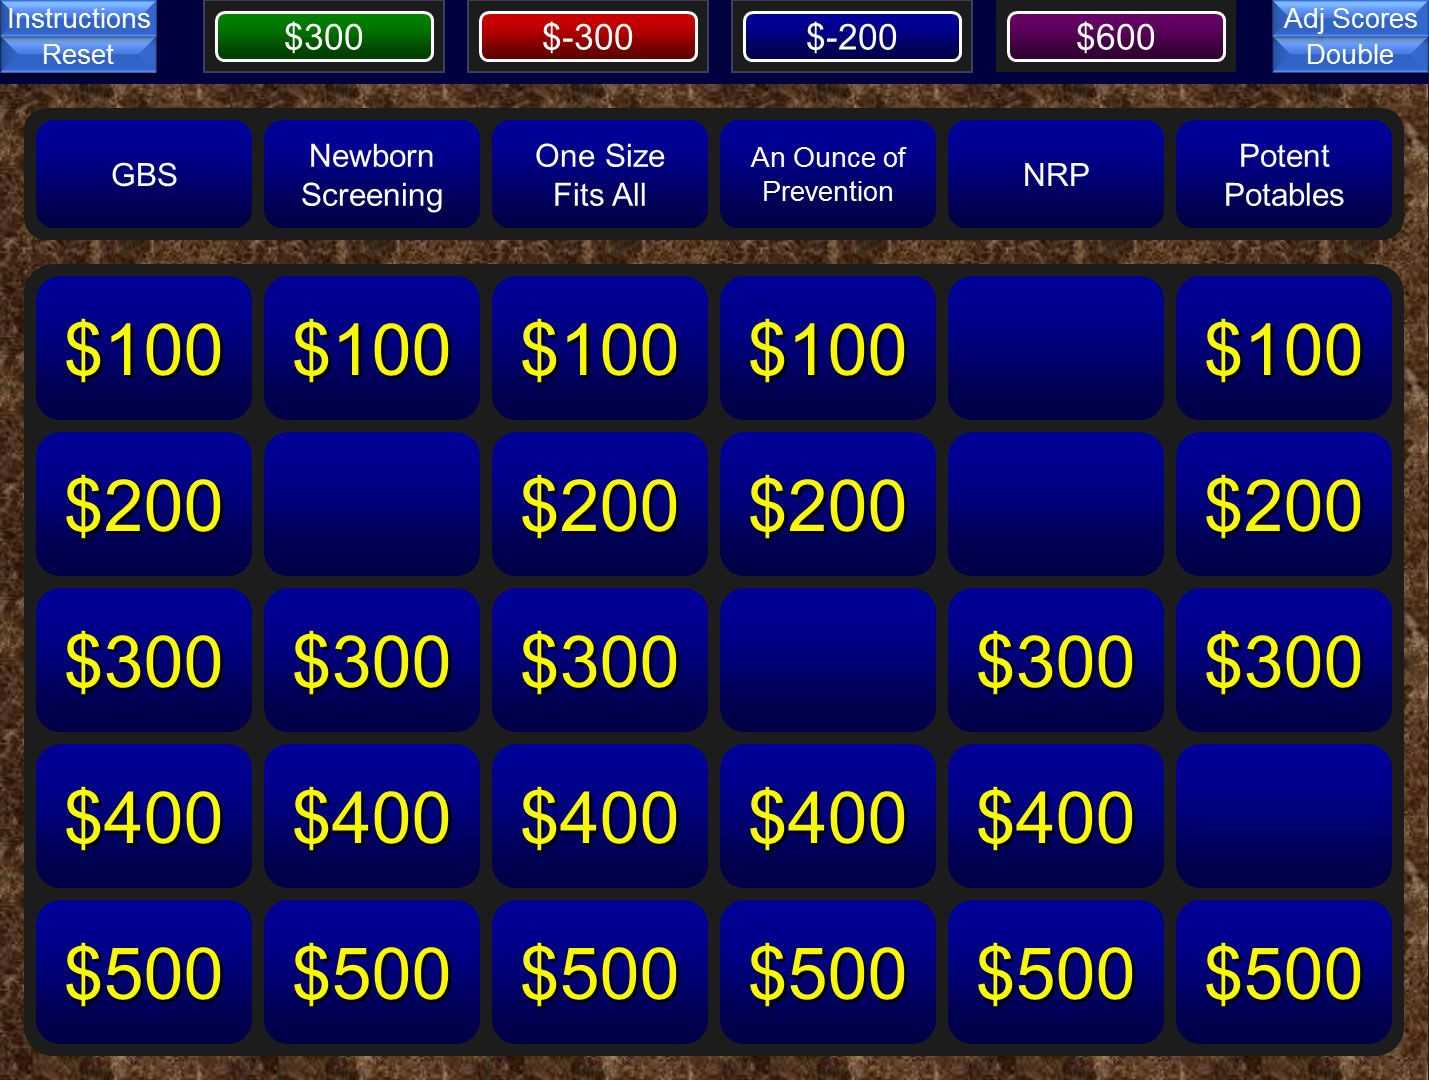 A Free Powerpoint Jeopardy Template For The Classroom. Keeps Throughout Jeopardy Powerpoint Template With Score